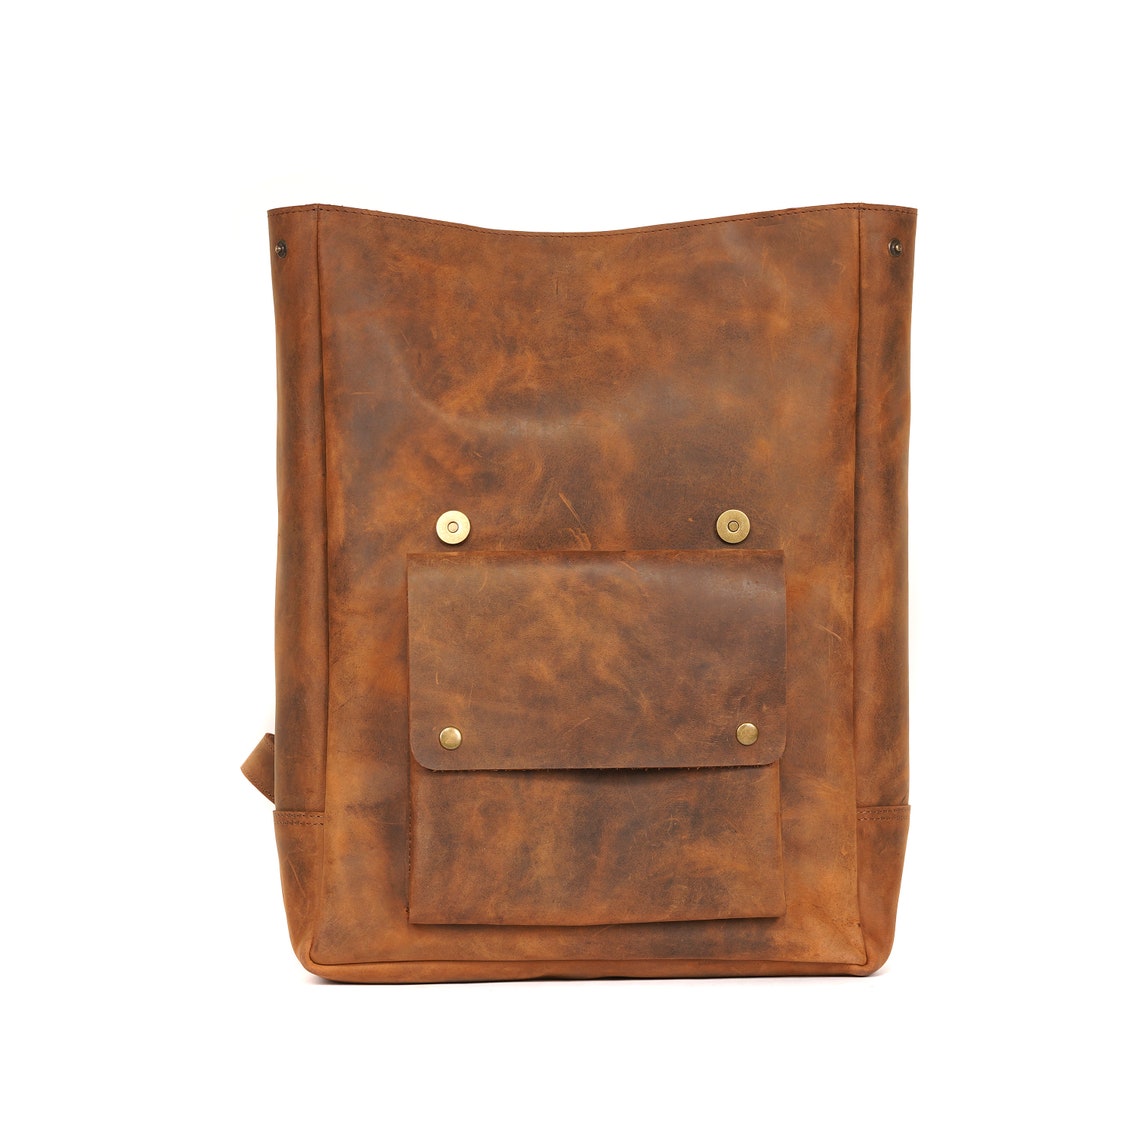 Melbourne Leather Co Handcrafted LEATHER BACKPACK in cognac tan brown Colour with LINING / Citi Rucksack - with two front pockets - LB05